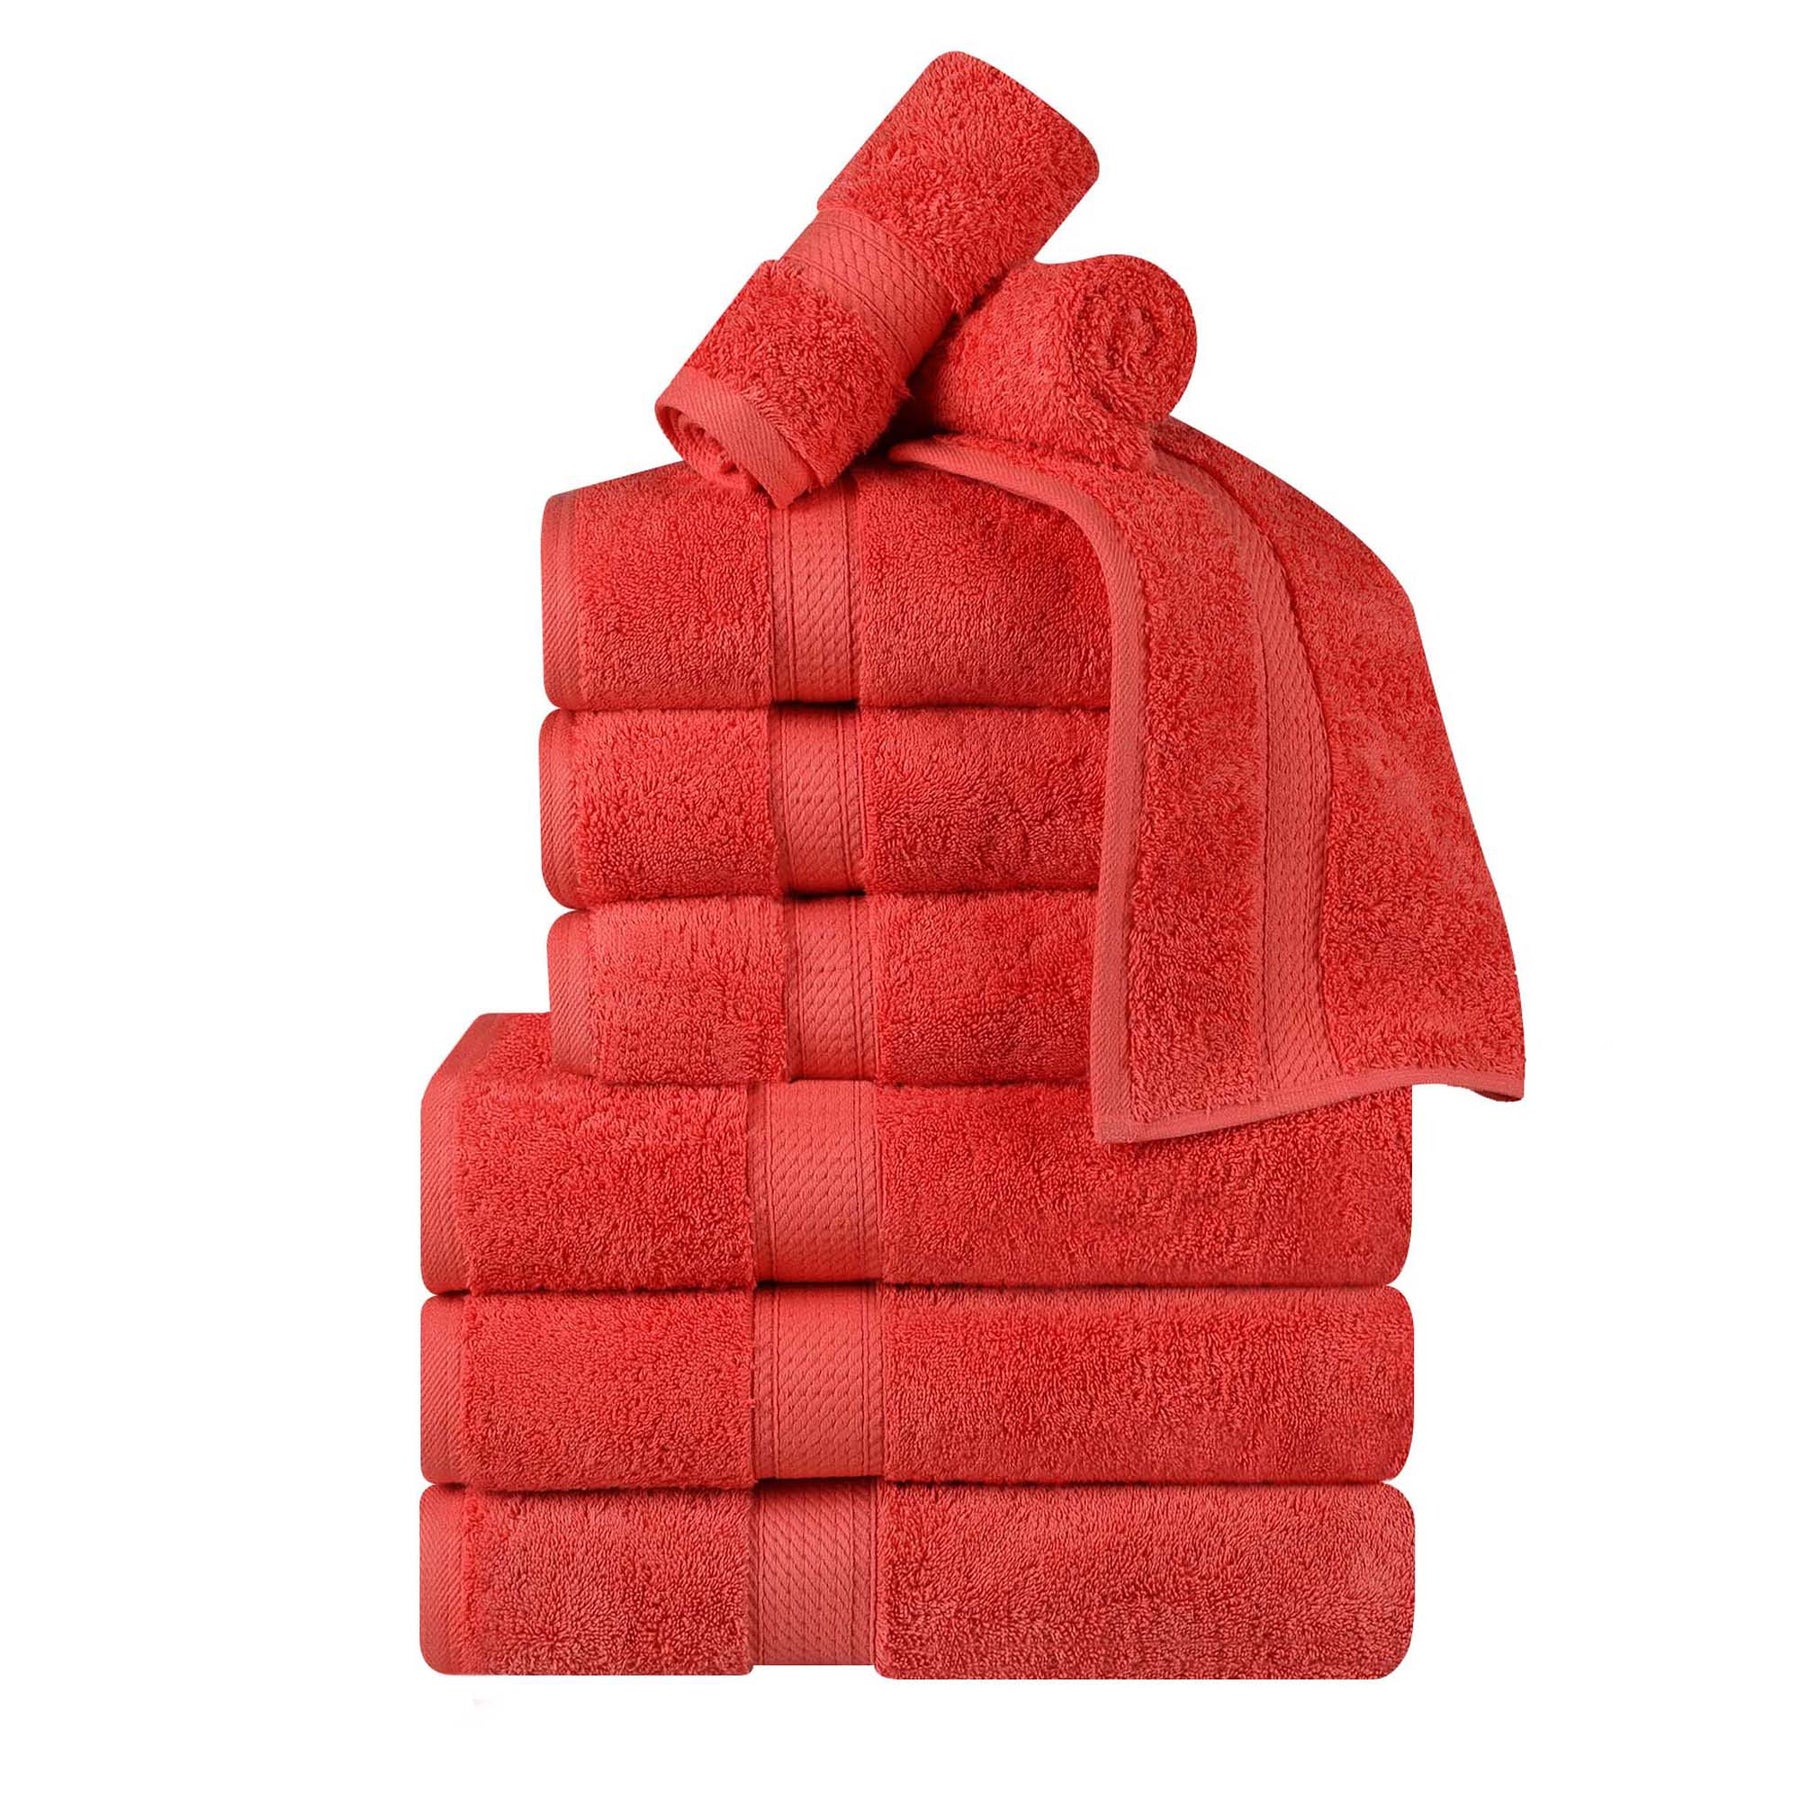 Superior Egyptian Cotton Plush Heavyweight Absorbent Luxury Soft 9-Piece Towel Set - Coral